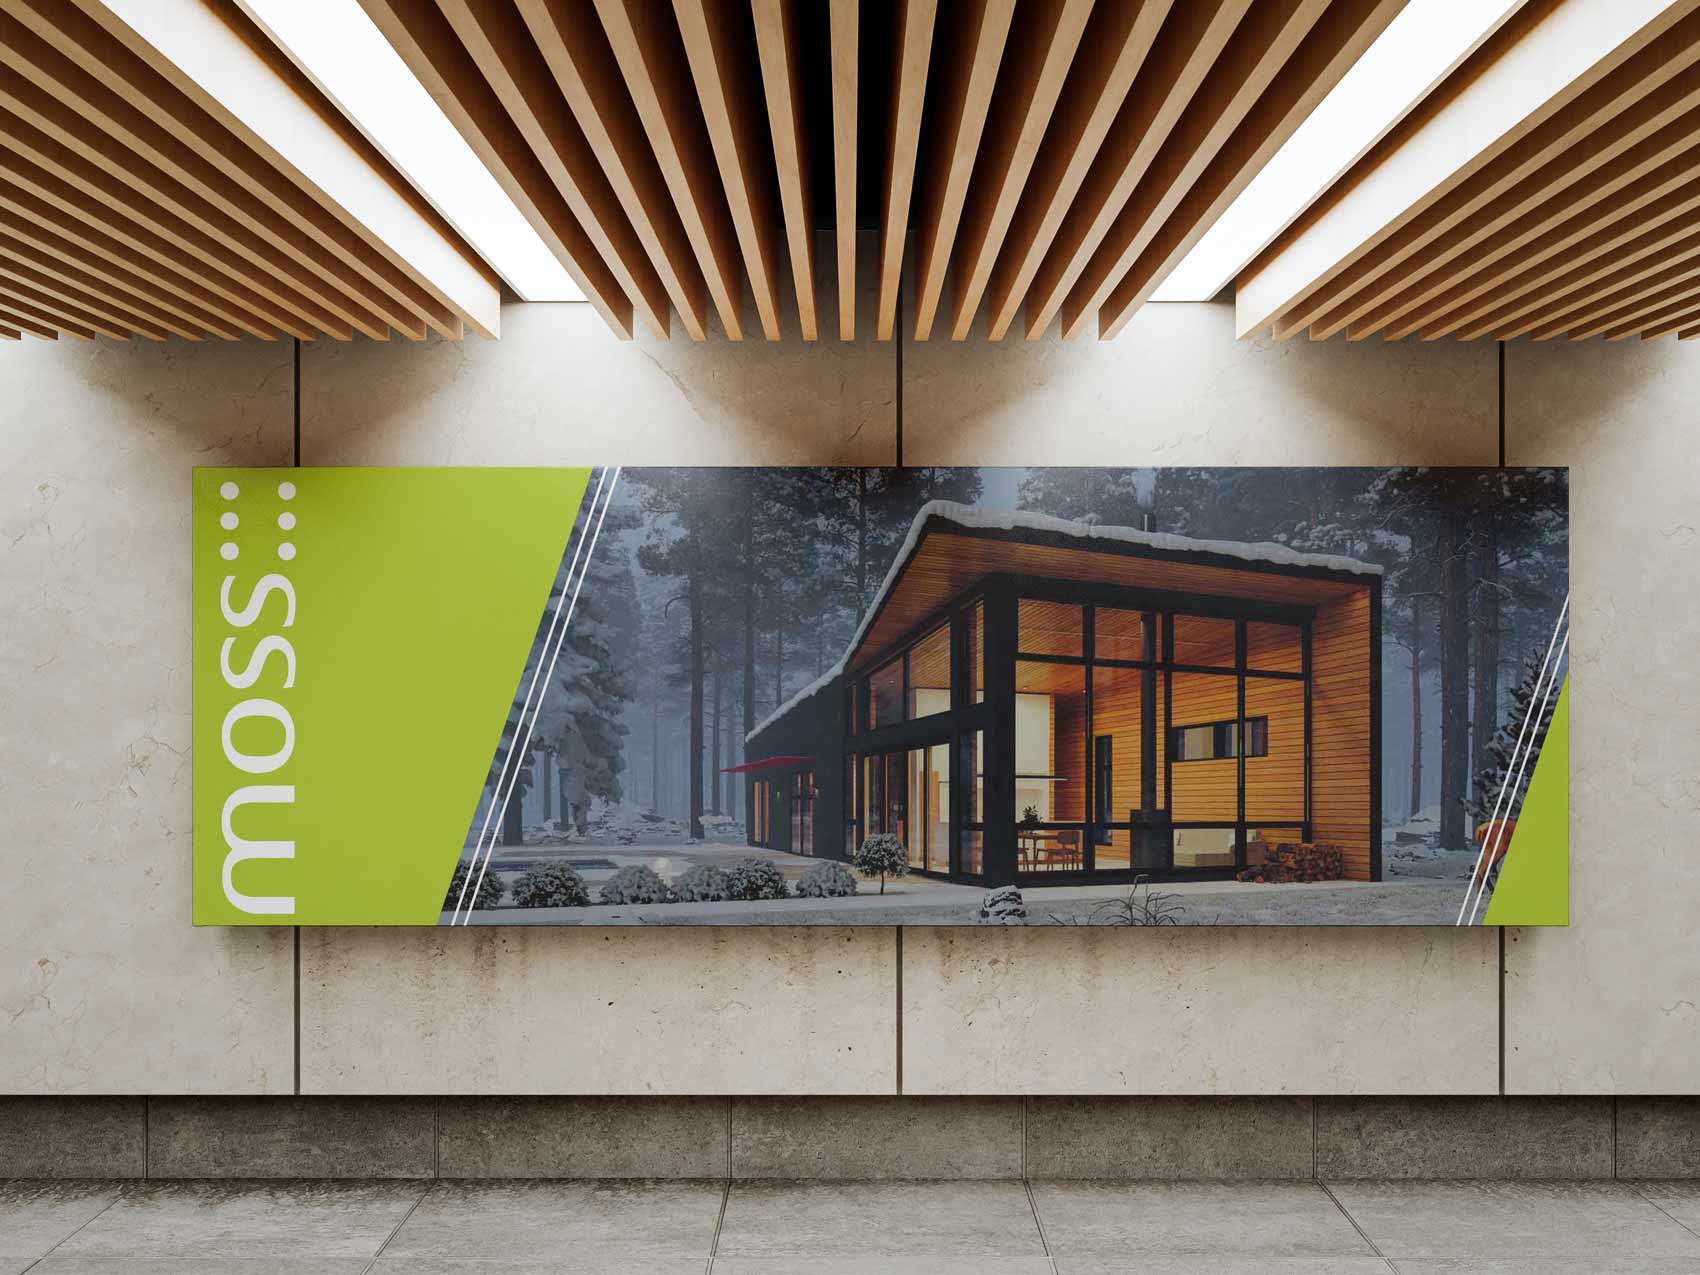 A billboard design for an architecture firm indoors.